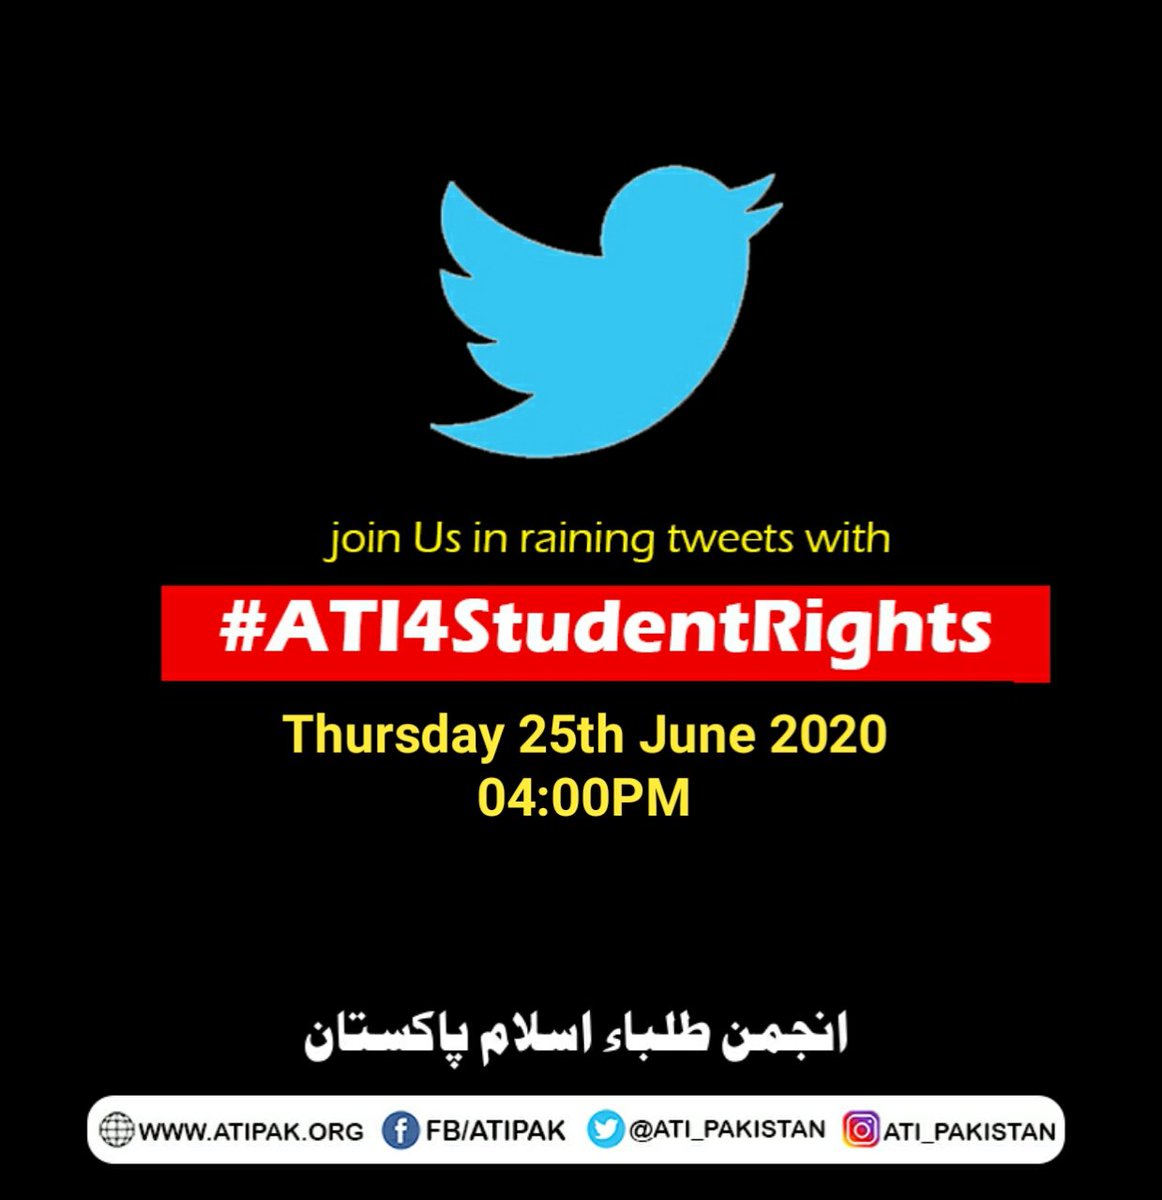 Join Us in Raining Tweets With 
#ATI4SudentRights
Thursday 25th june 2020 @ 04:00pm.

#ATIPAK #WeSucceeded #NoClassesNoFee